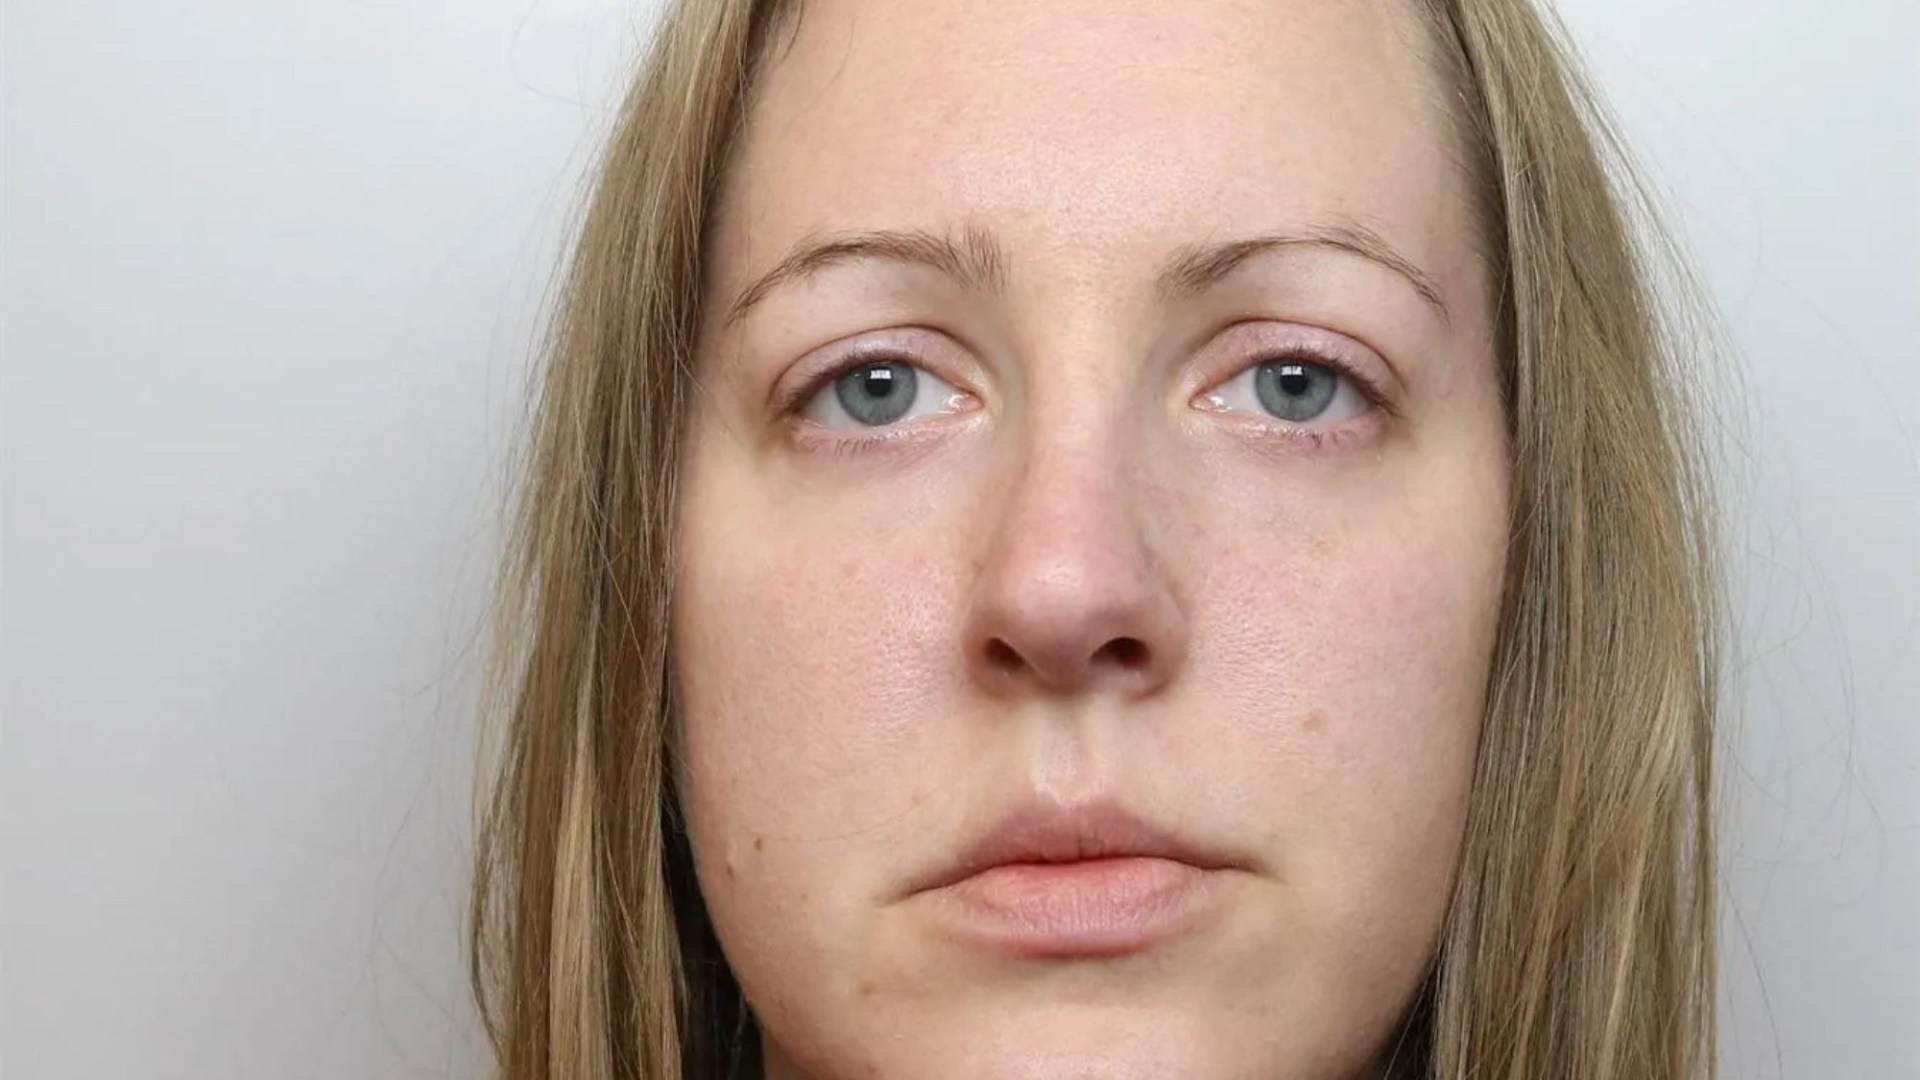 Taxpayers rack up eye-watering £2.5million bill to prosecute killer nurse Lucy Letby